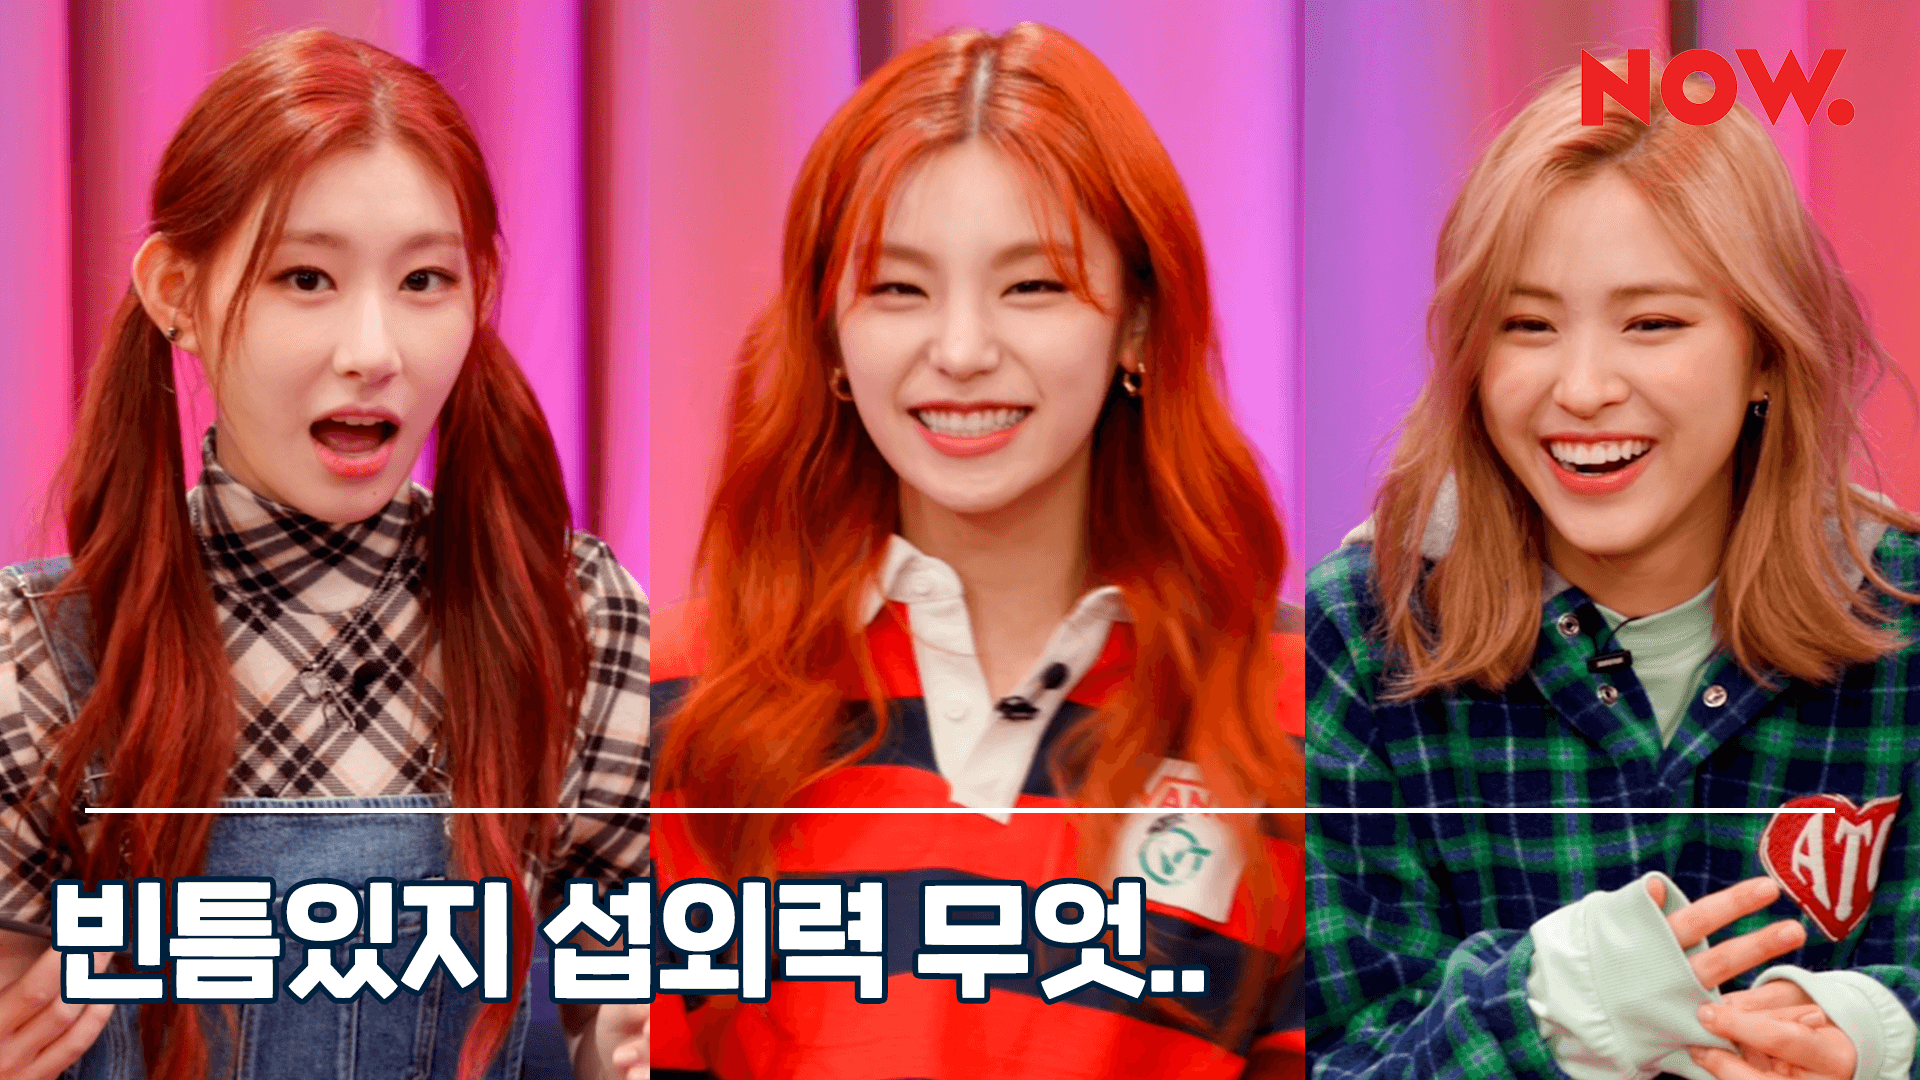 ITZY(있지) "bㅣㄴ틈있지" EP.05 Highlight : Surprising Guests for ITZY